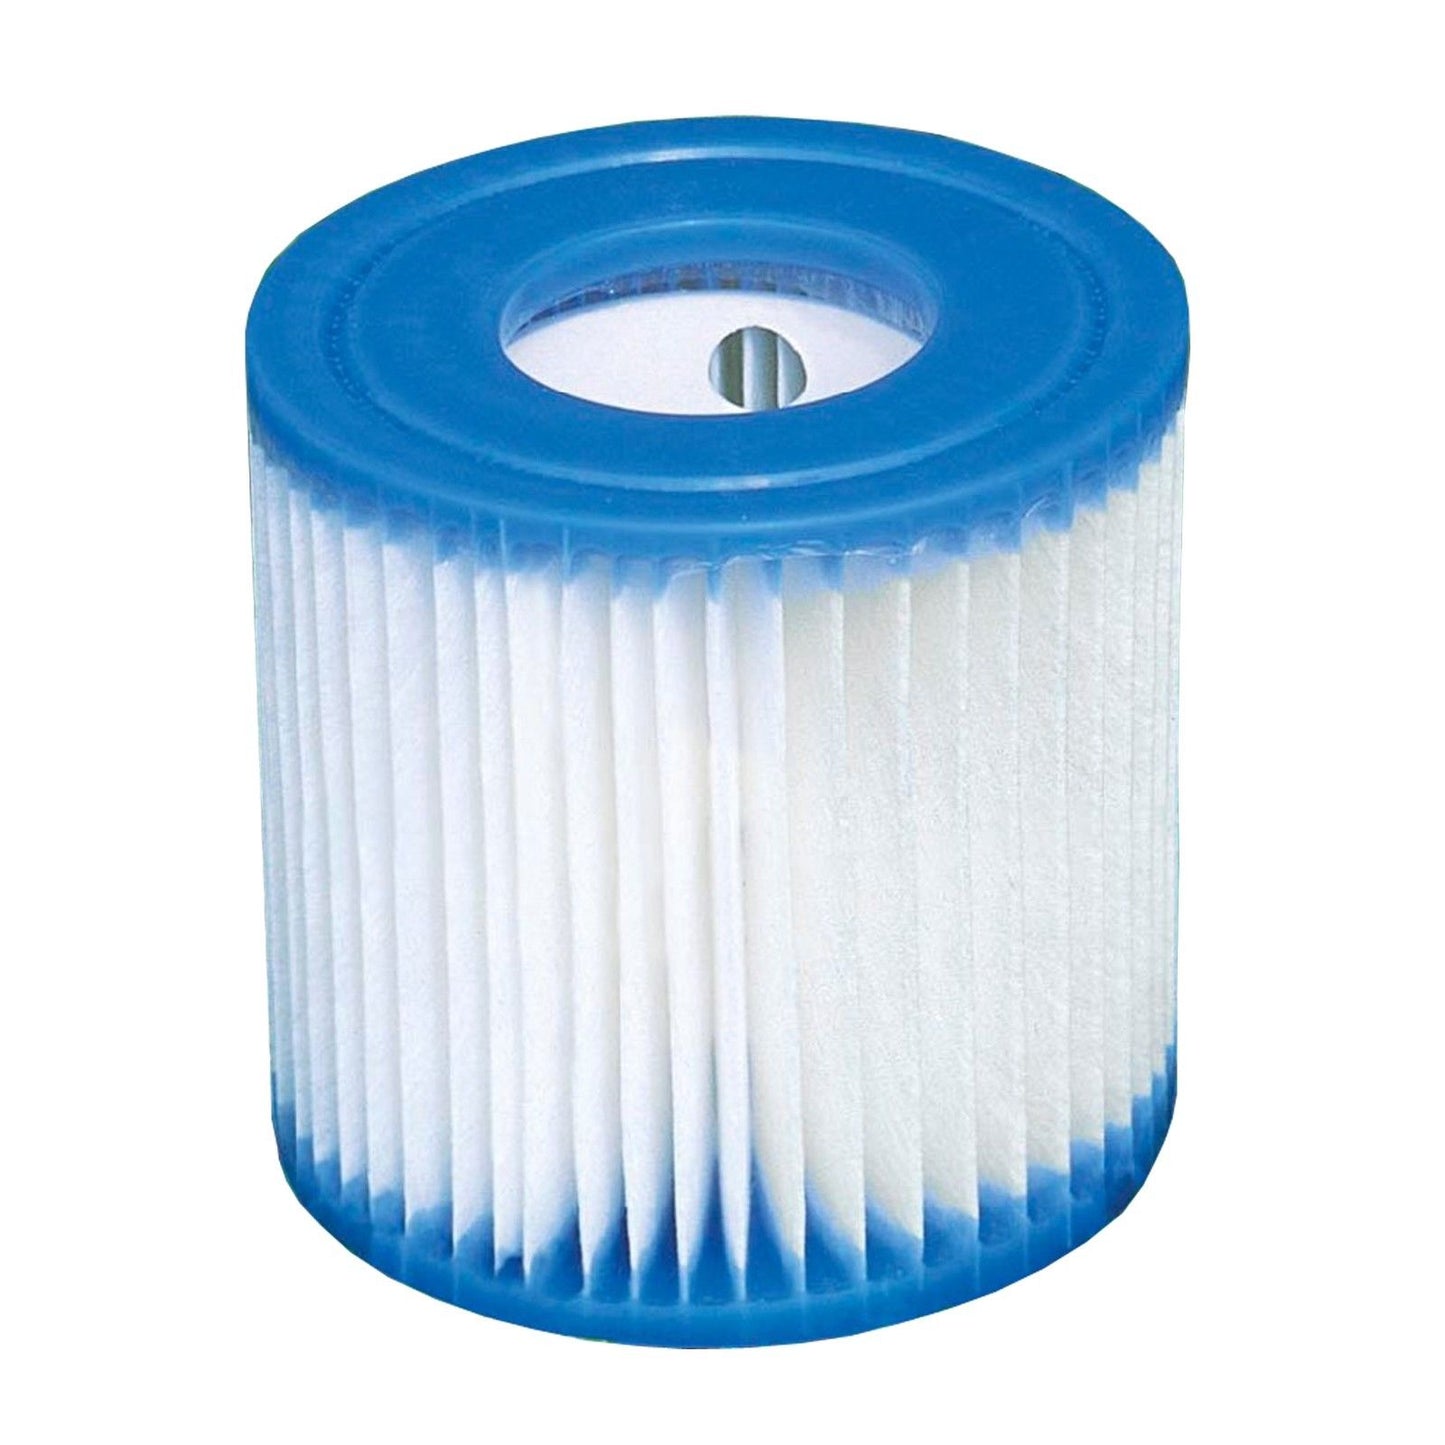 Intex Type H Filter Cartridge for Above Ground Swimming Pool Pumps 12 Pack